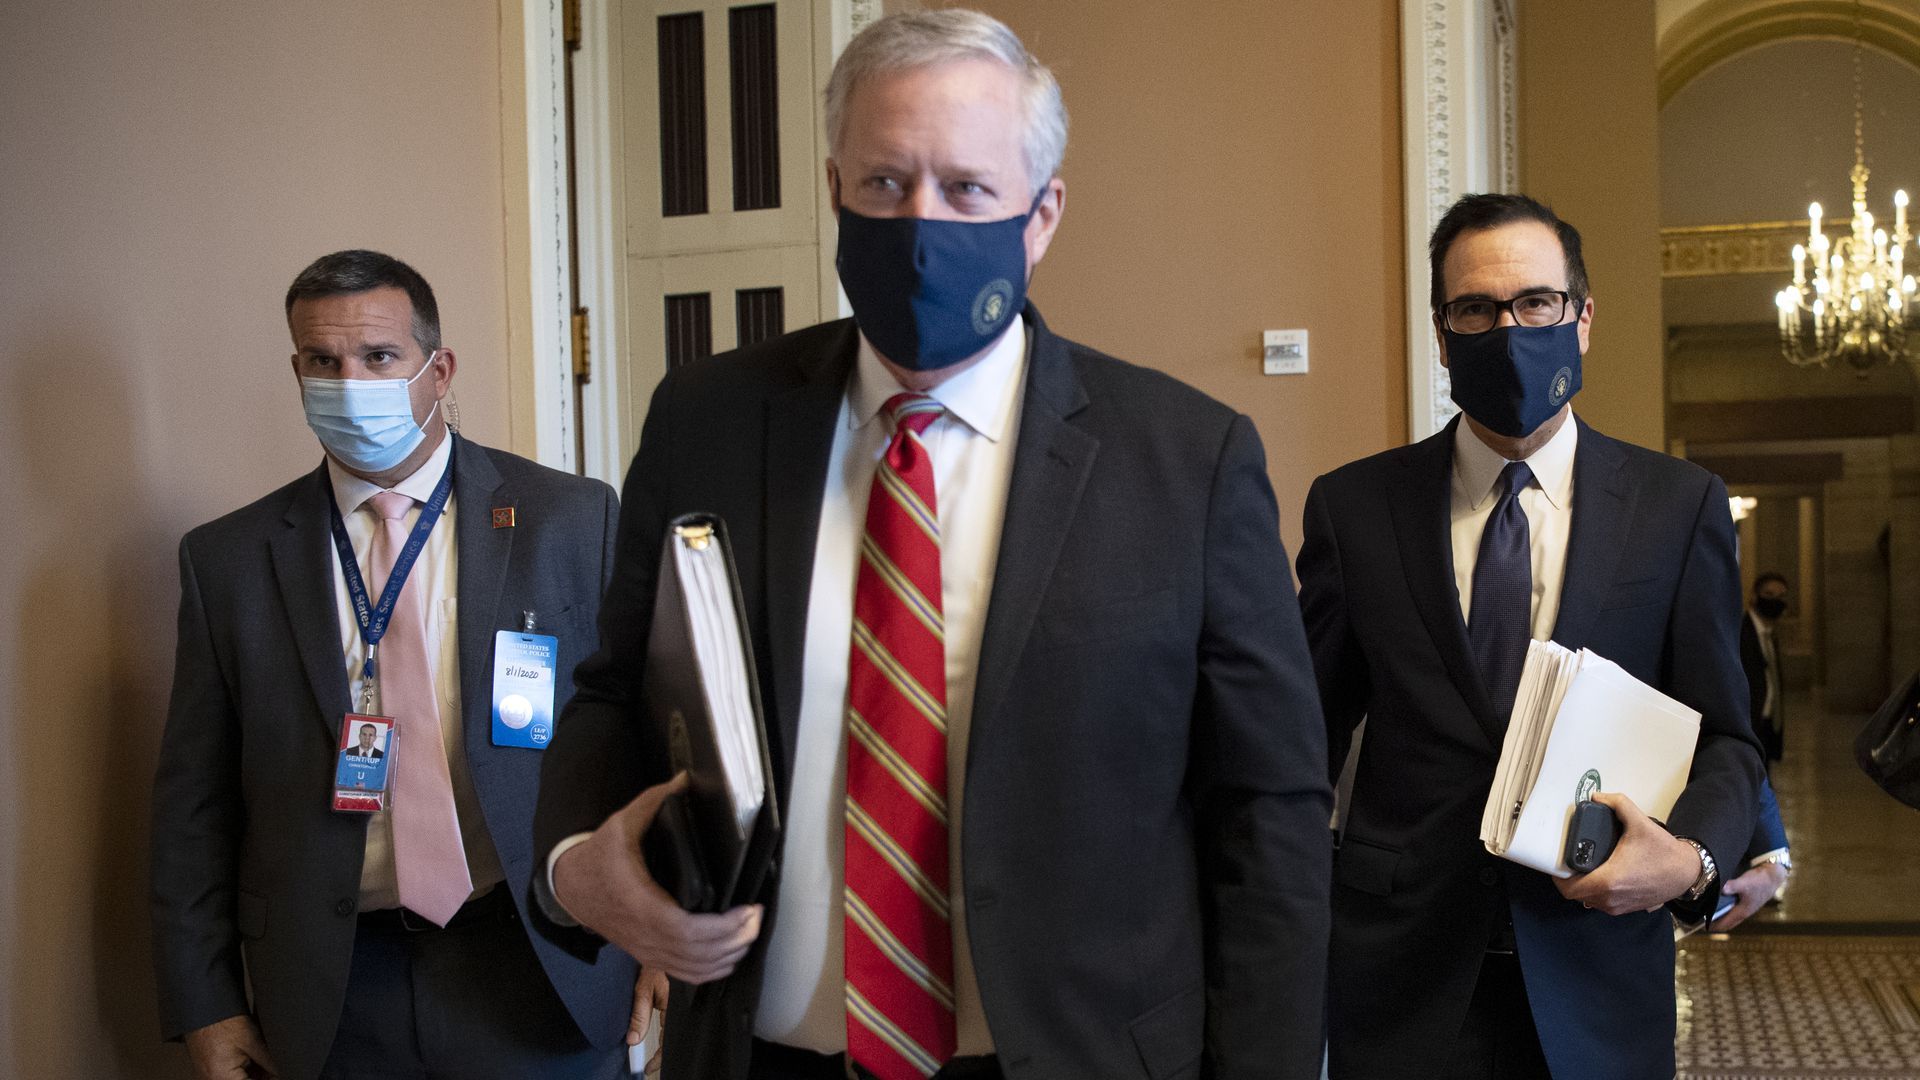 Mark Meadows, Steven Mnuchin walk down a hall wearing suits and face masks